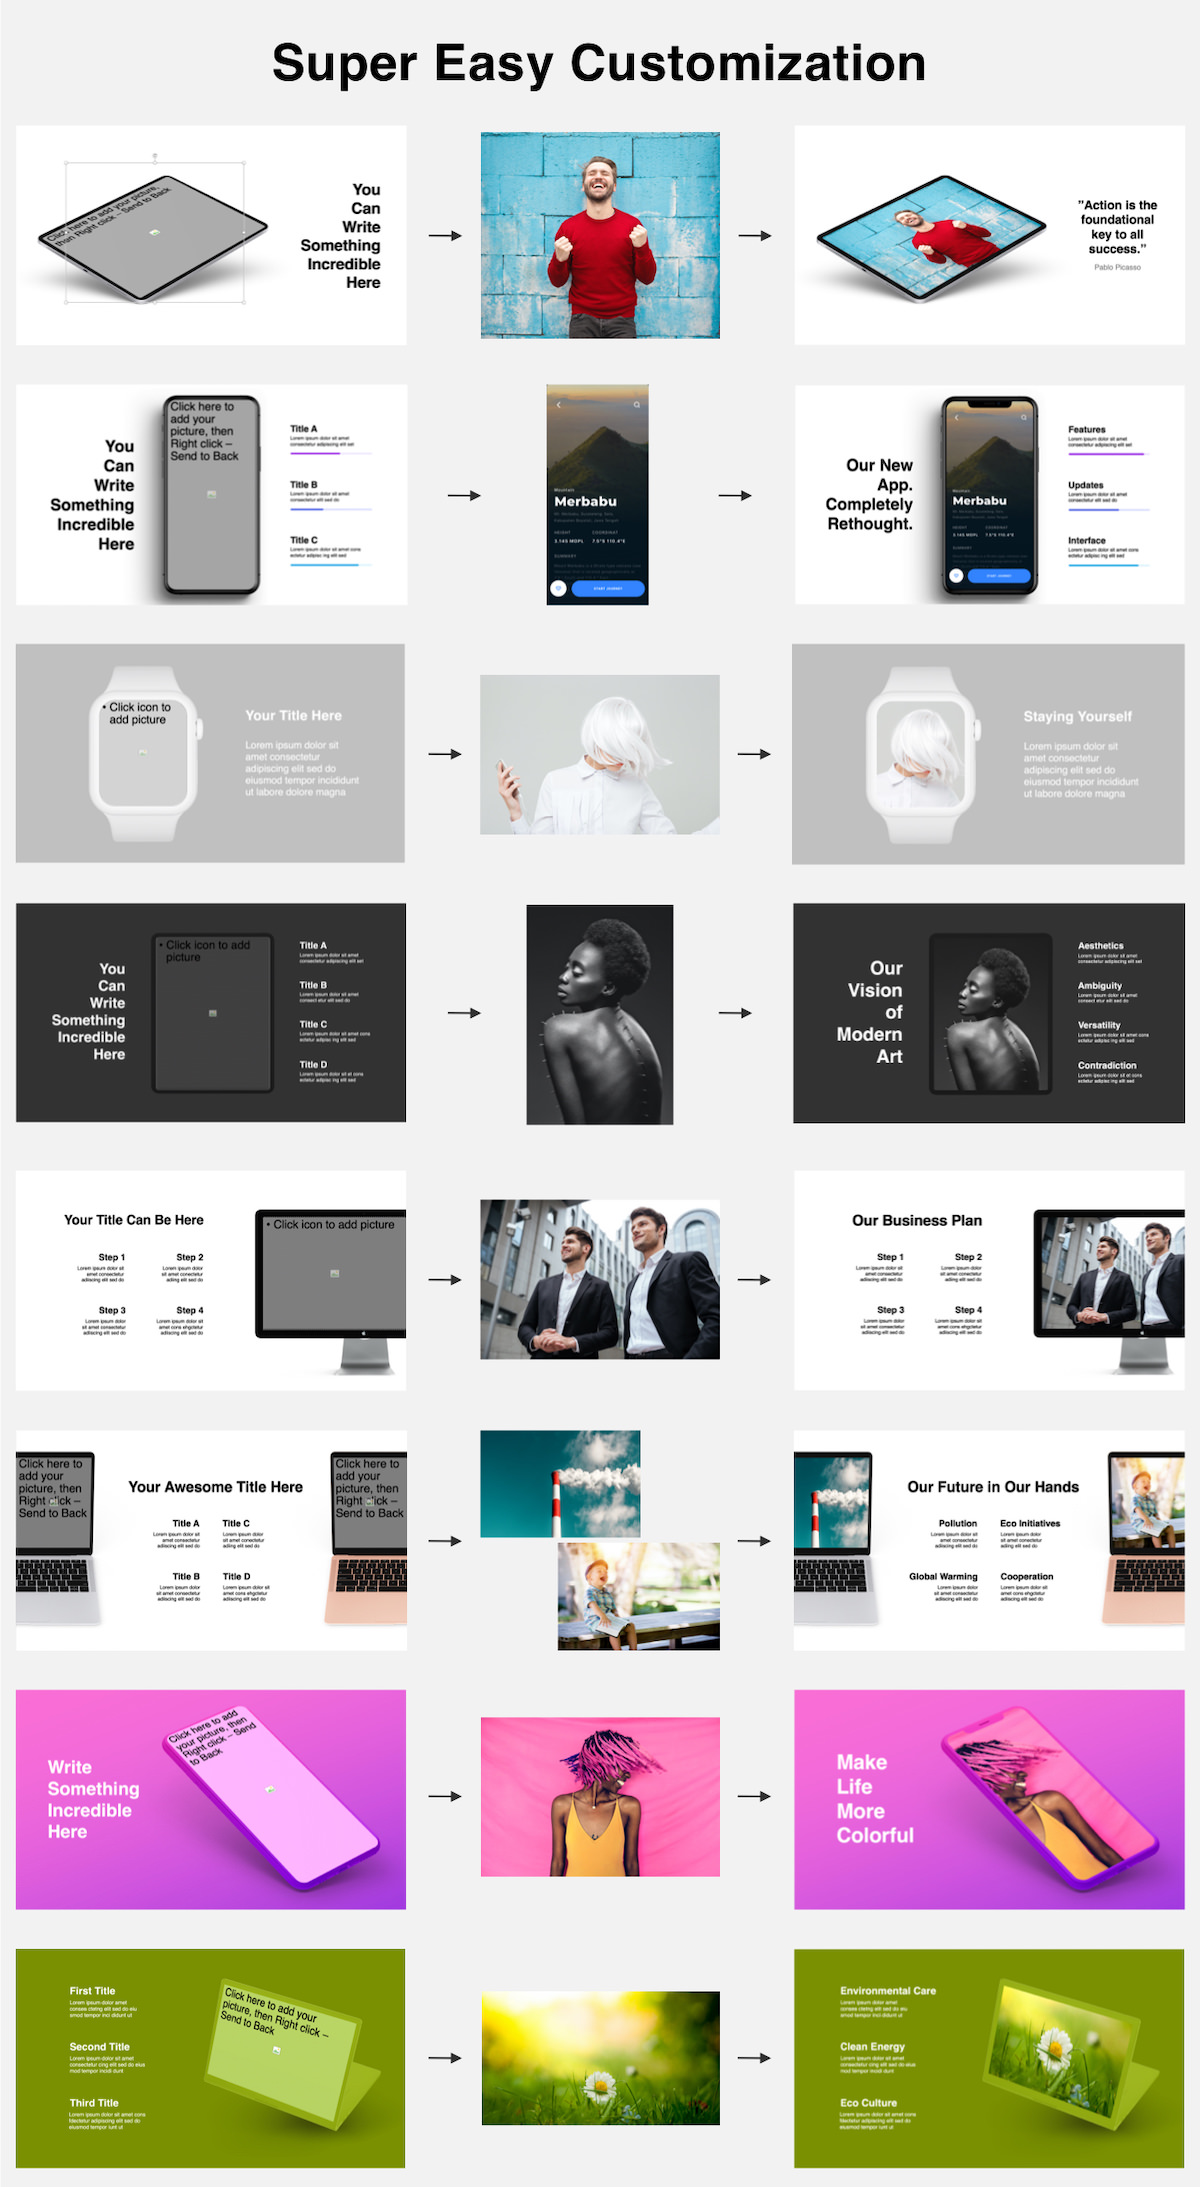 Wowly - 3500 Infographics & Presentation Templates! Updated! PowerPoint Canva Figma Sketch Ai Psd. - 275